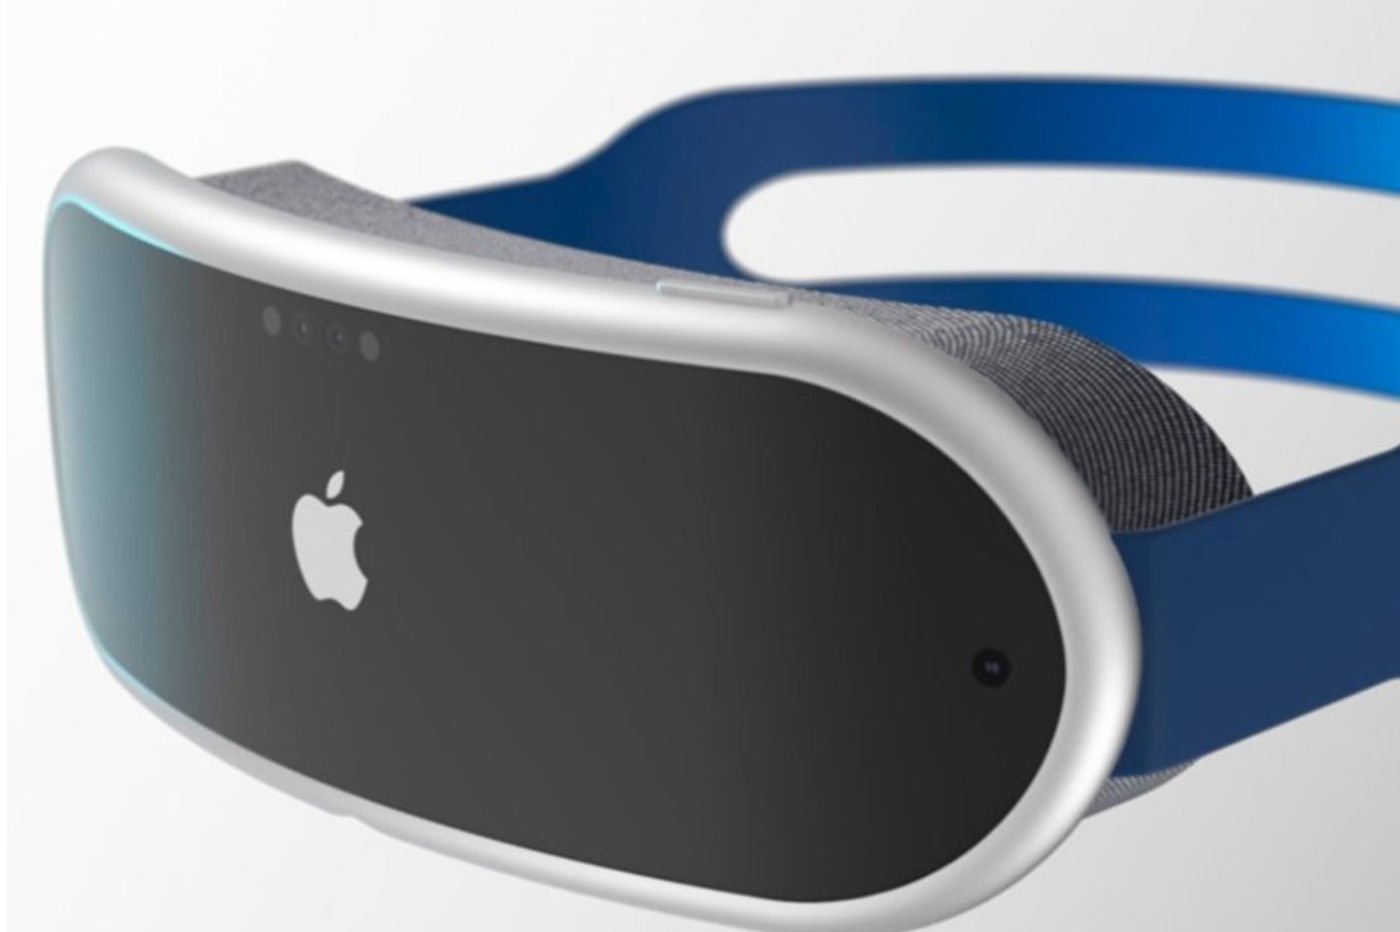 The future VR headset will be just as powerful as a Mac